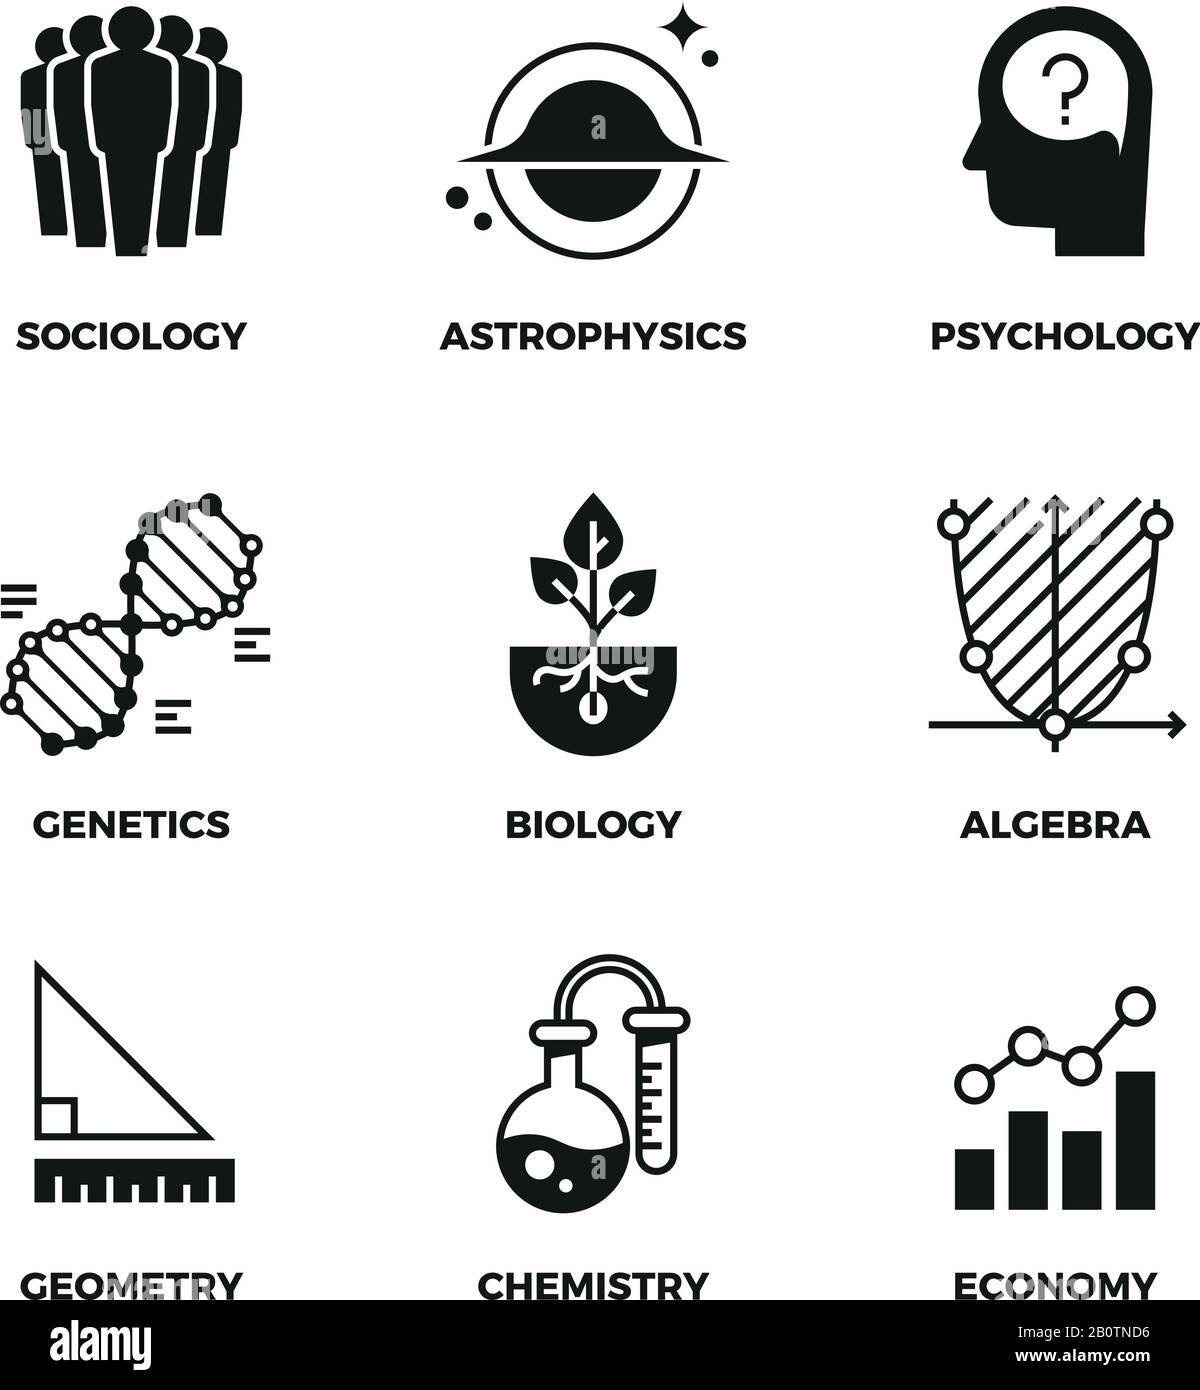 Science vector icons set. Genetics and economy, algebra and chemistry. Geometry and biology, psychology and astrophysics, sociology symbols. Monochrome illustration sign of science discipline Stock Vector